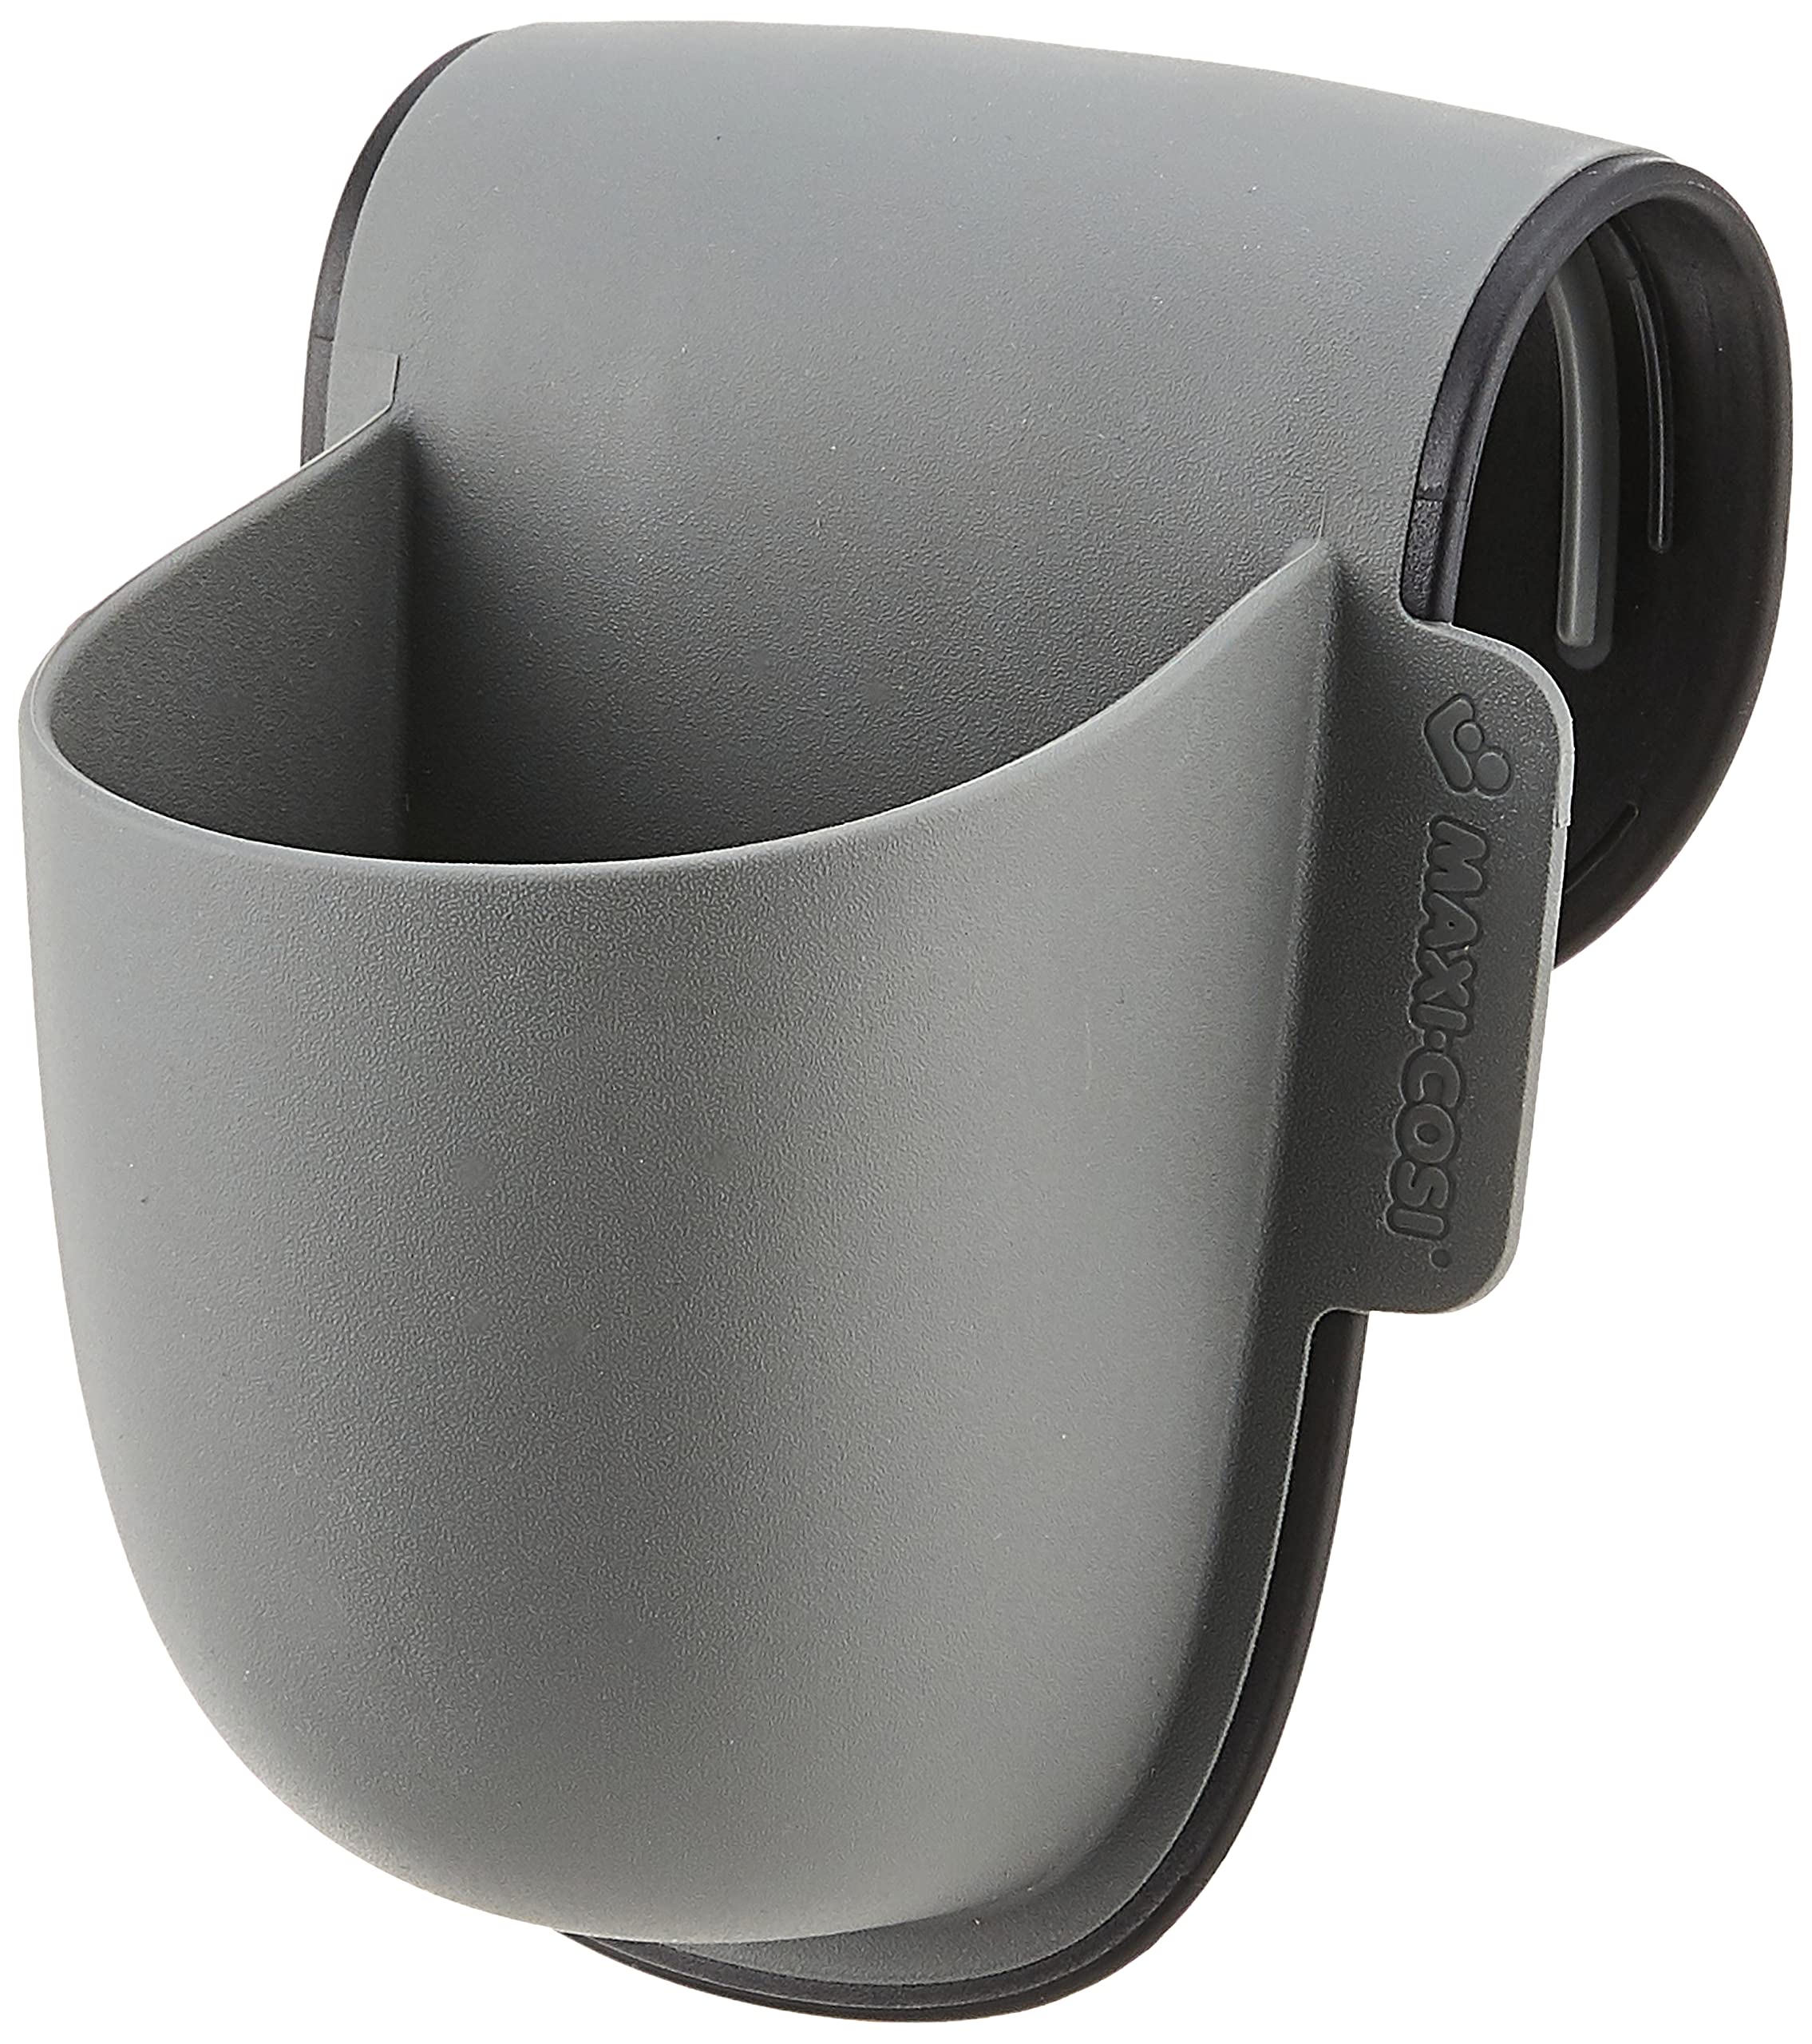 Maxi-Cosi Universal Pocket/Cup Holder, Suitable for Maxi-Cosi Toddler and Child Car Seats, Grey